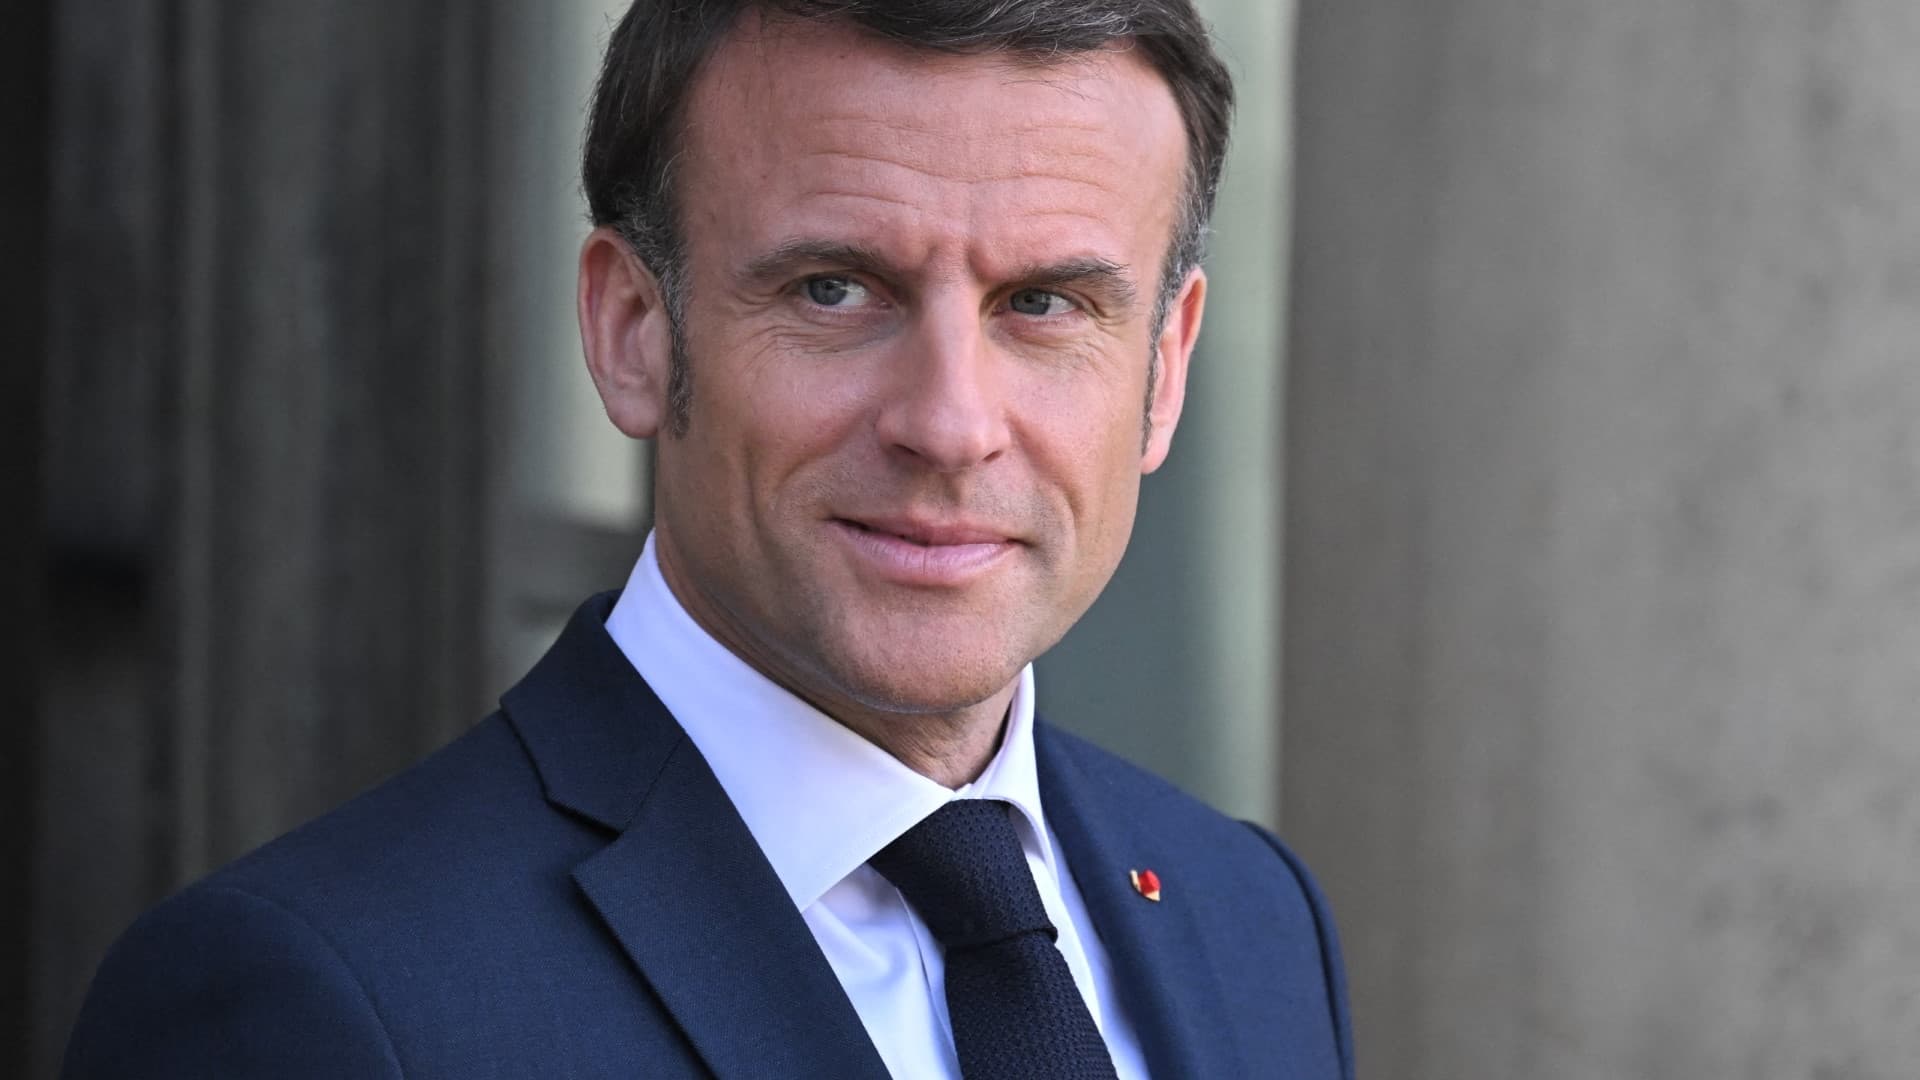 Macron salutes the two French people who “acted like true heroes”